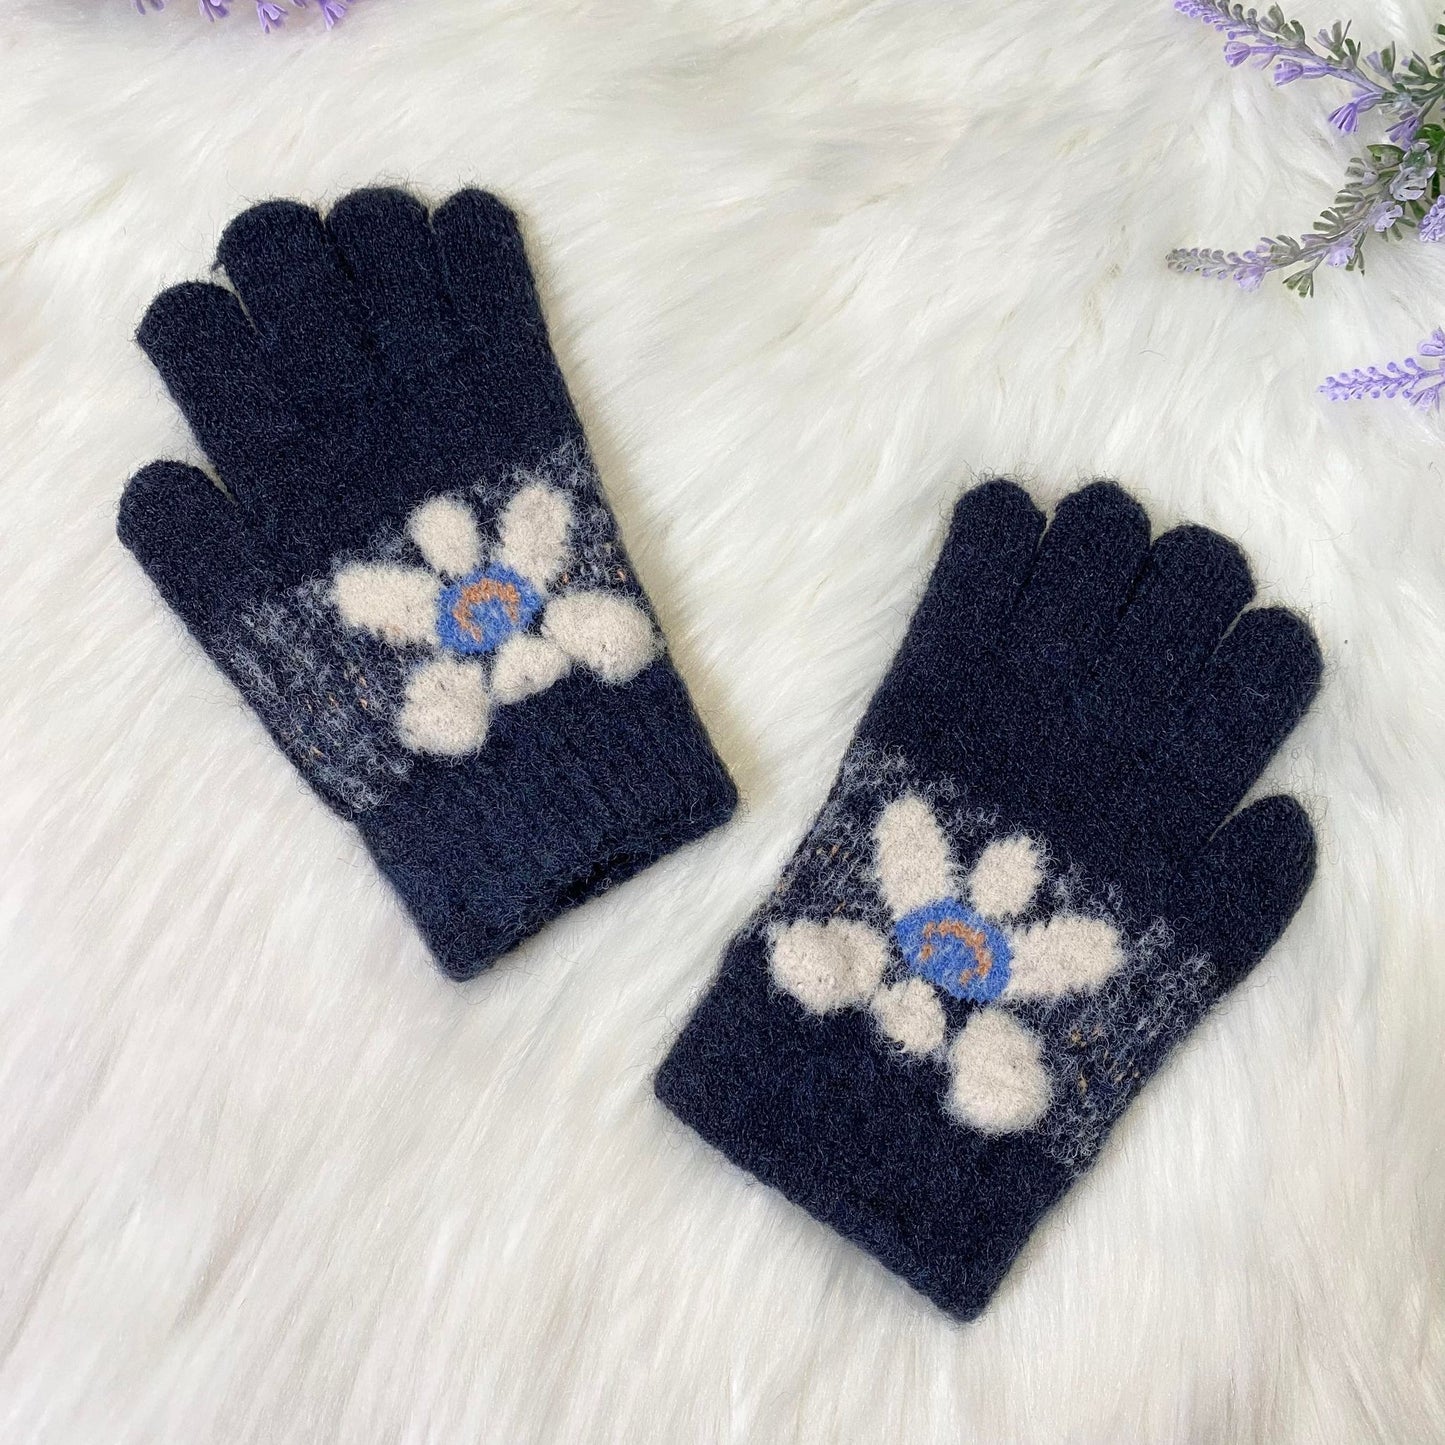 Fleece Lined Kids Handknit Gloves, Mittens for 4 to 8 years Old